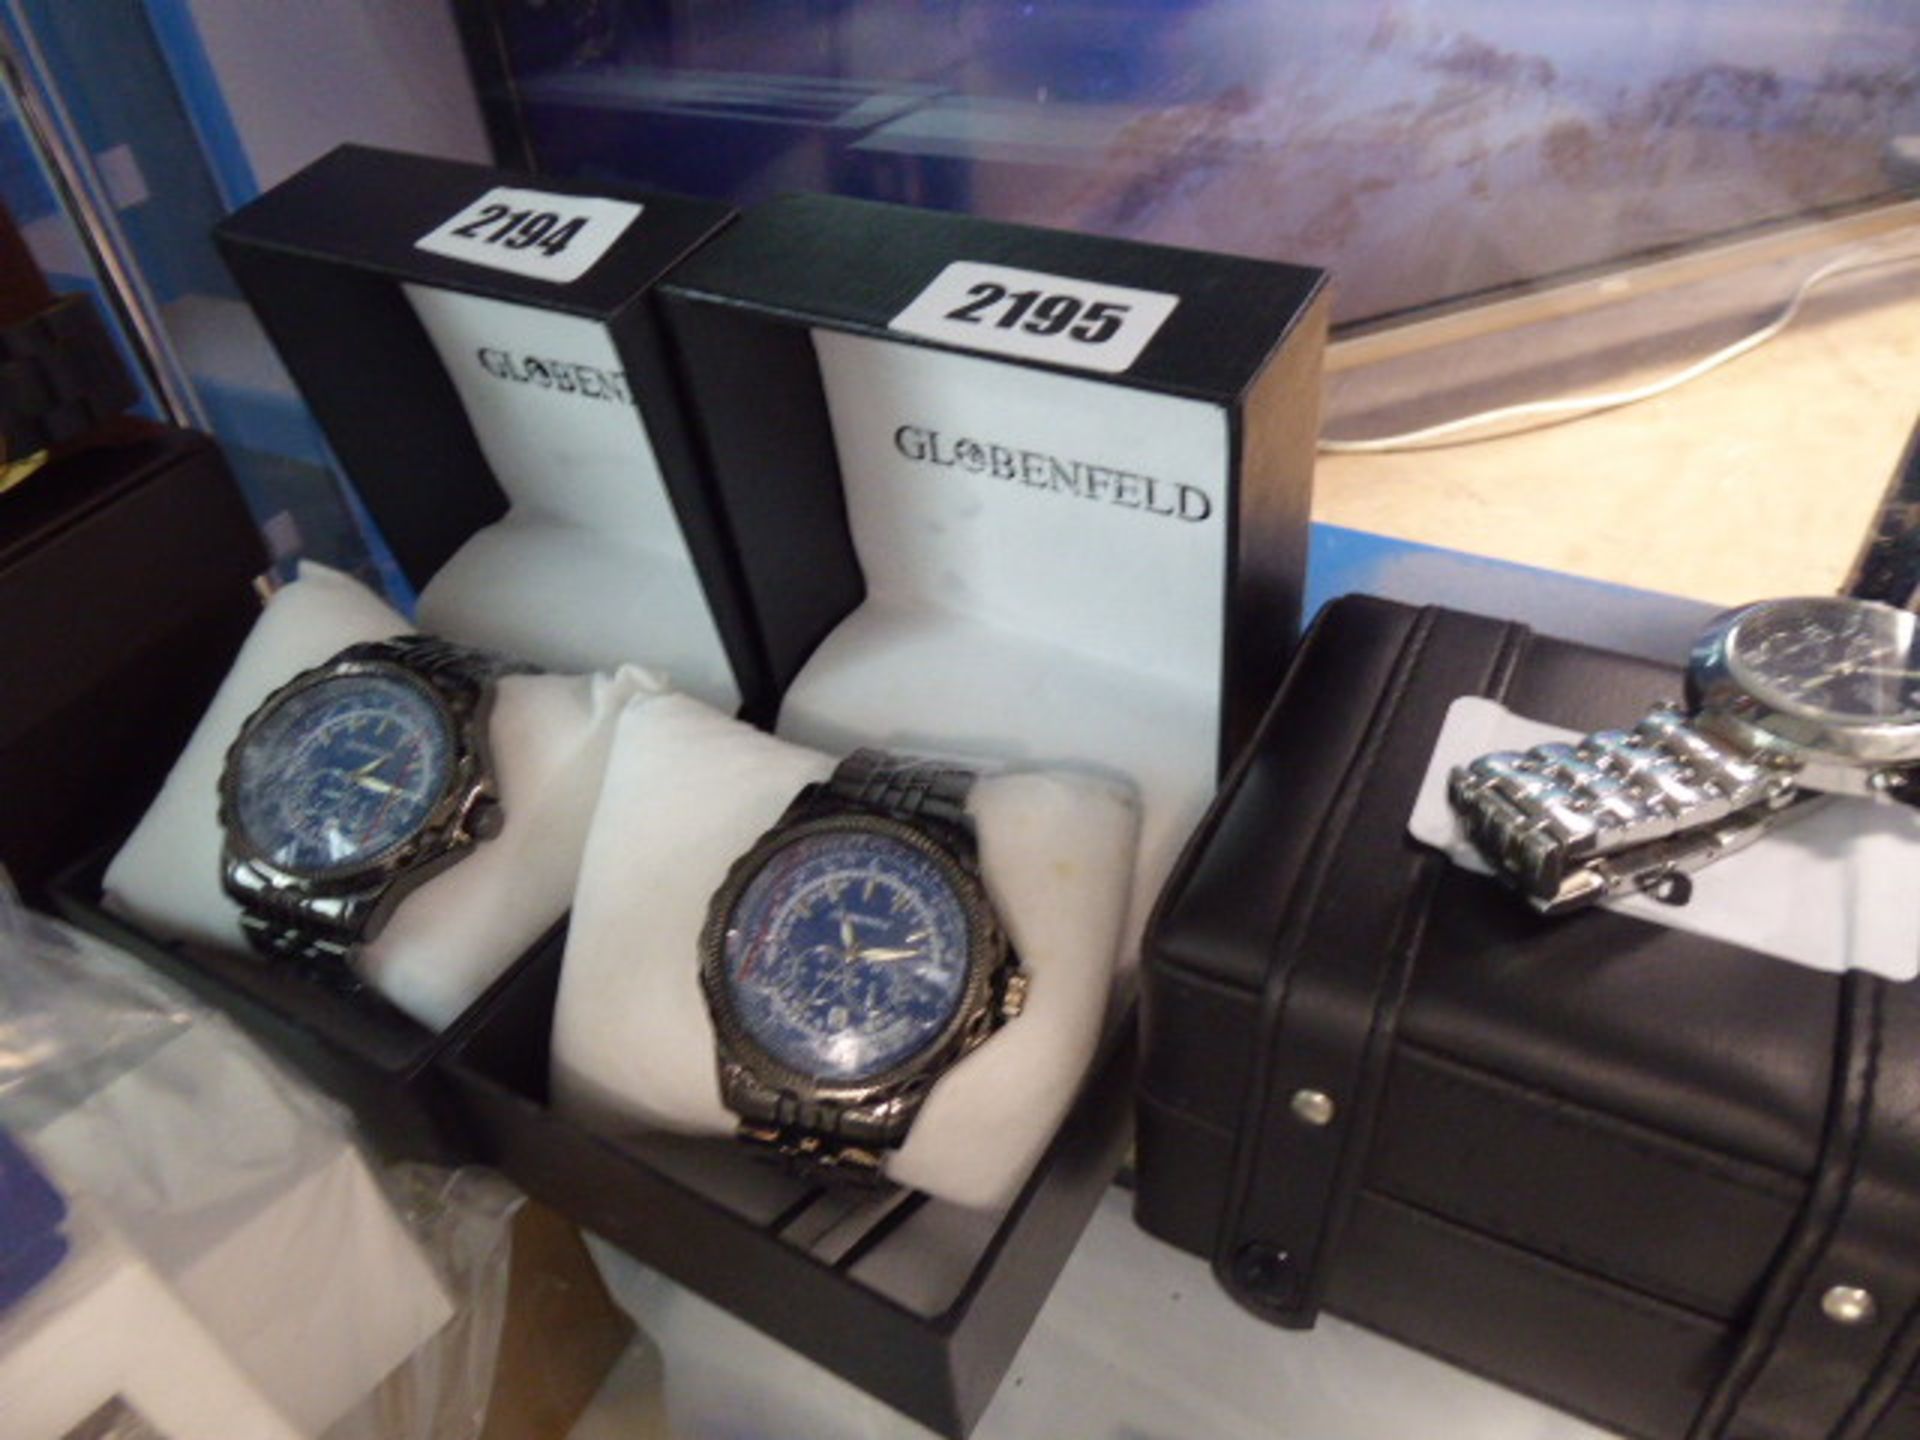 Globenfeld blue dial gents stainless steel strap watch in box